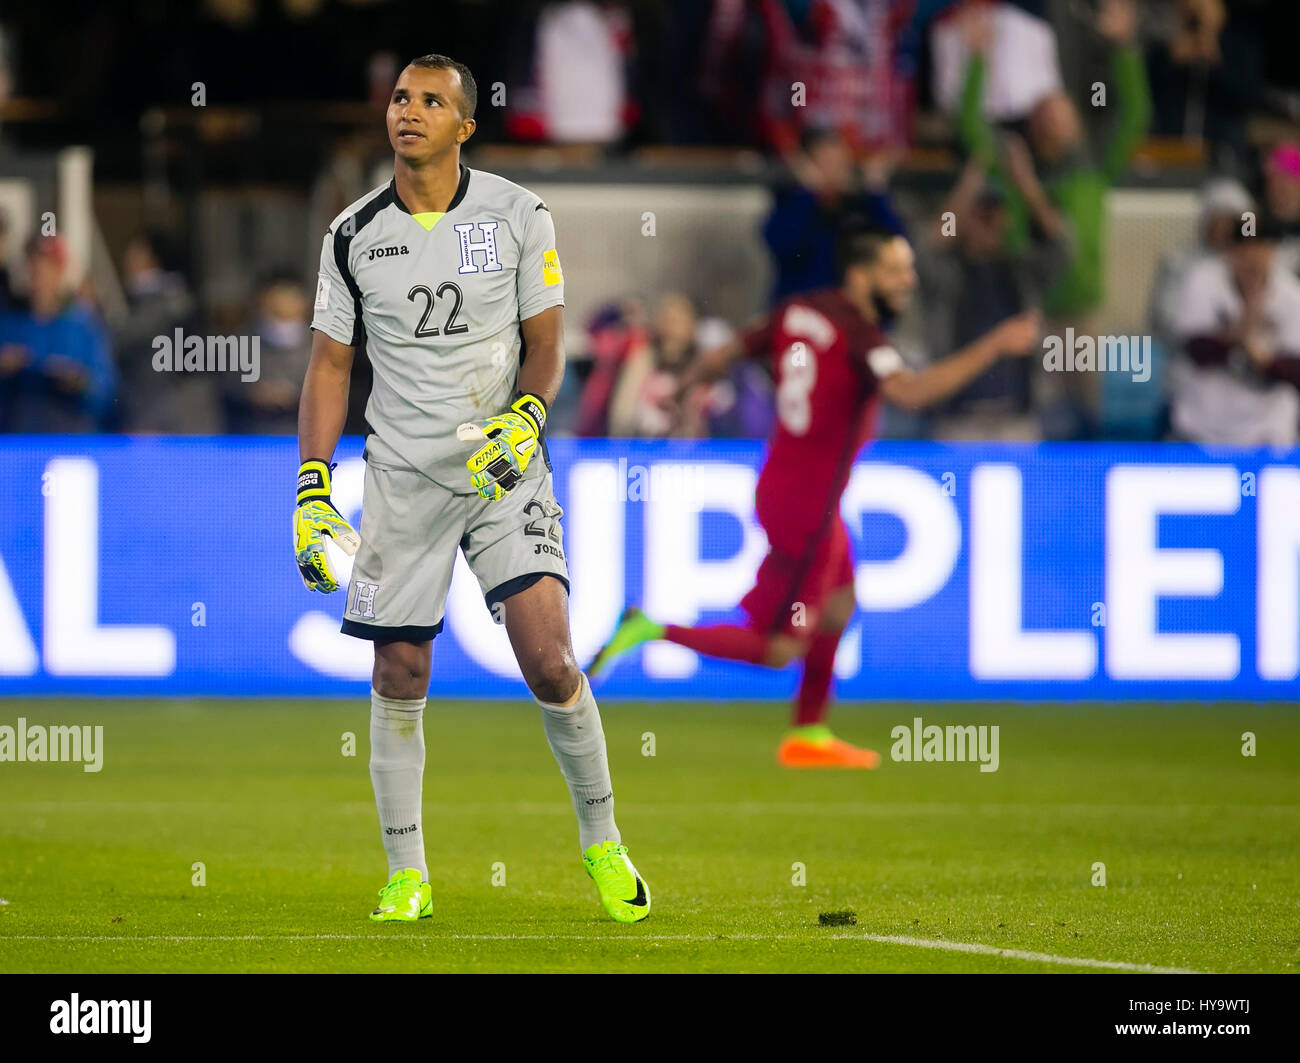 San Jose, CA. 24th Mar, 2017. Honduras National Team goal keeper Donis Escober (22) reacts to giving up a goal to US forward Clint Dempsey (8) during the FIFA World Cup Qualifying game between the United States and Honduras at Avaya Stadium in San Jose, CA. The US defeated Honduras 6-0. Damon Tarver/Cal Sport Media/Alamy Live News Stock Photo